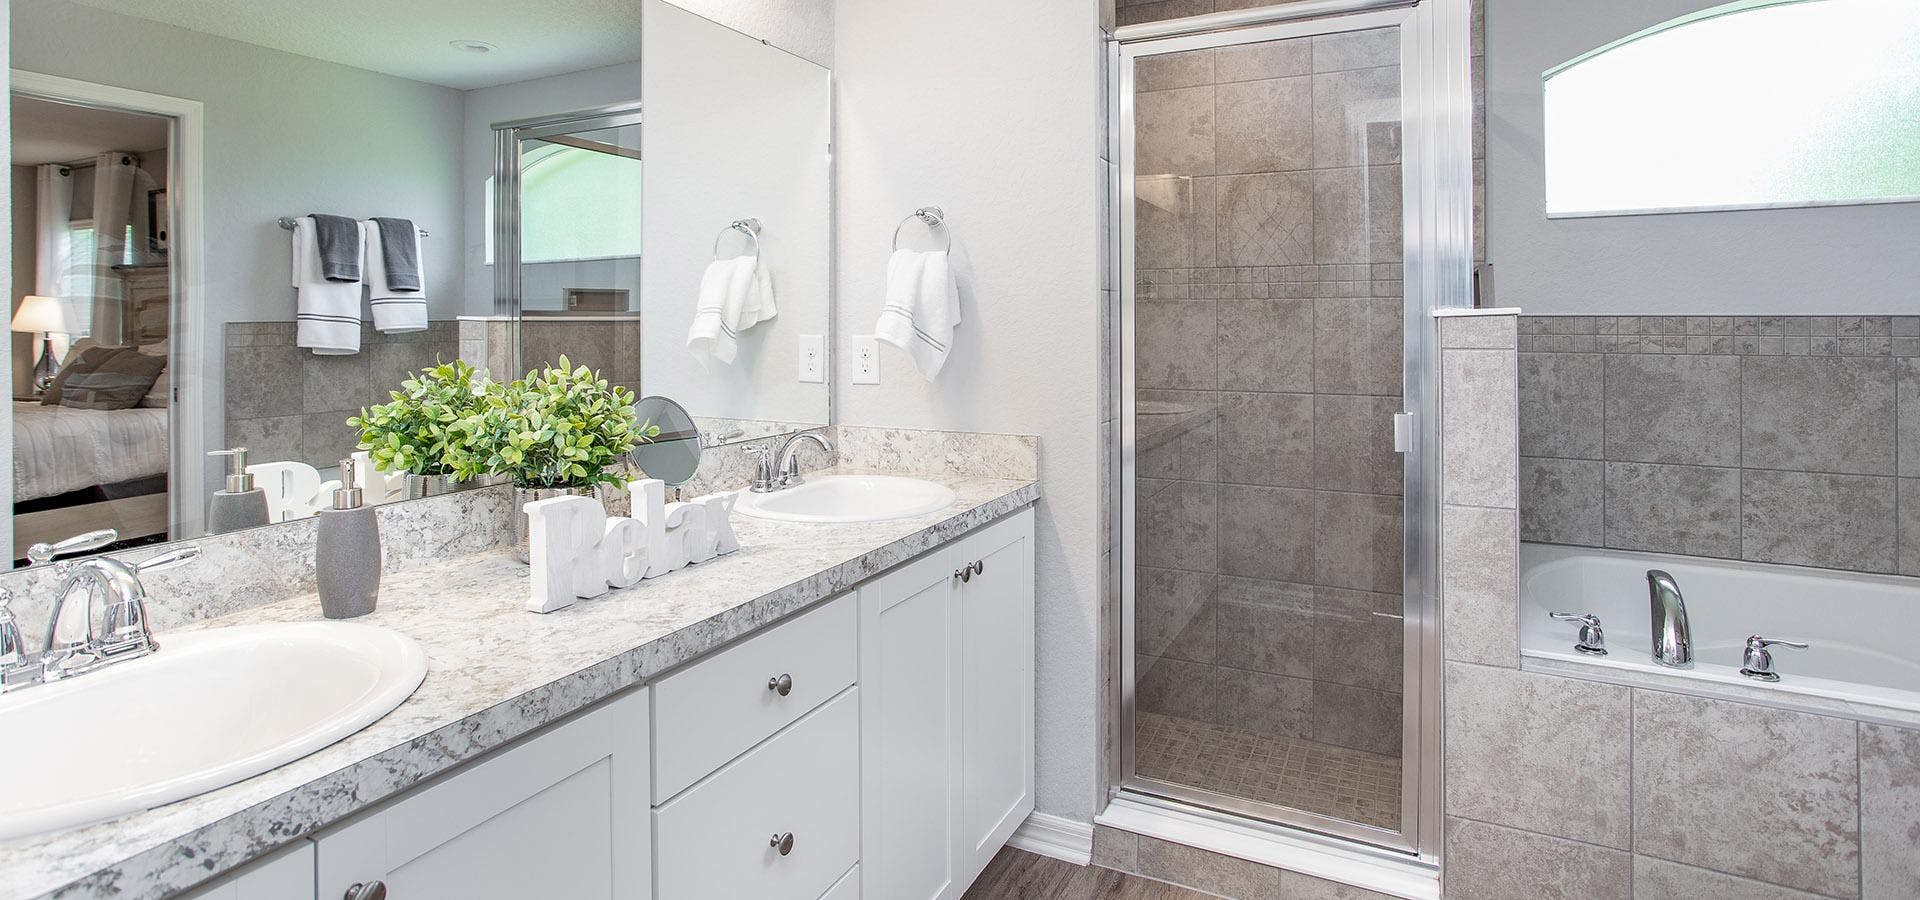 Owner's Bath with walk-in shower area